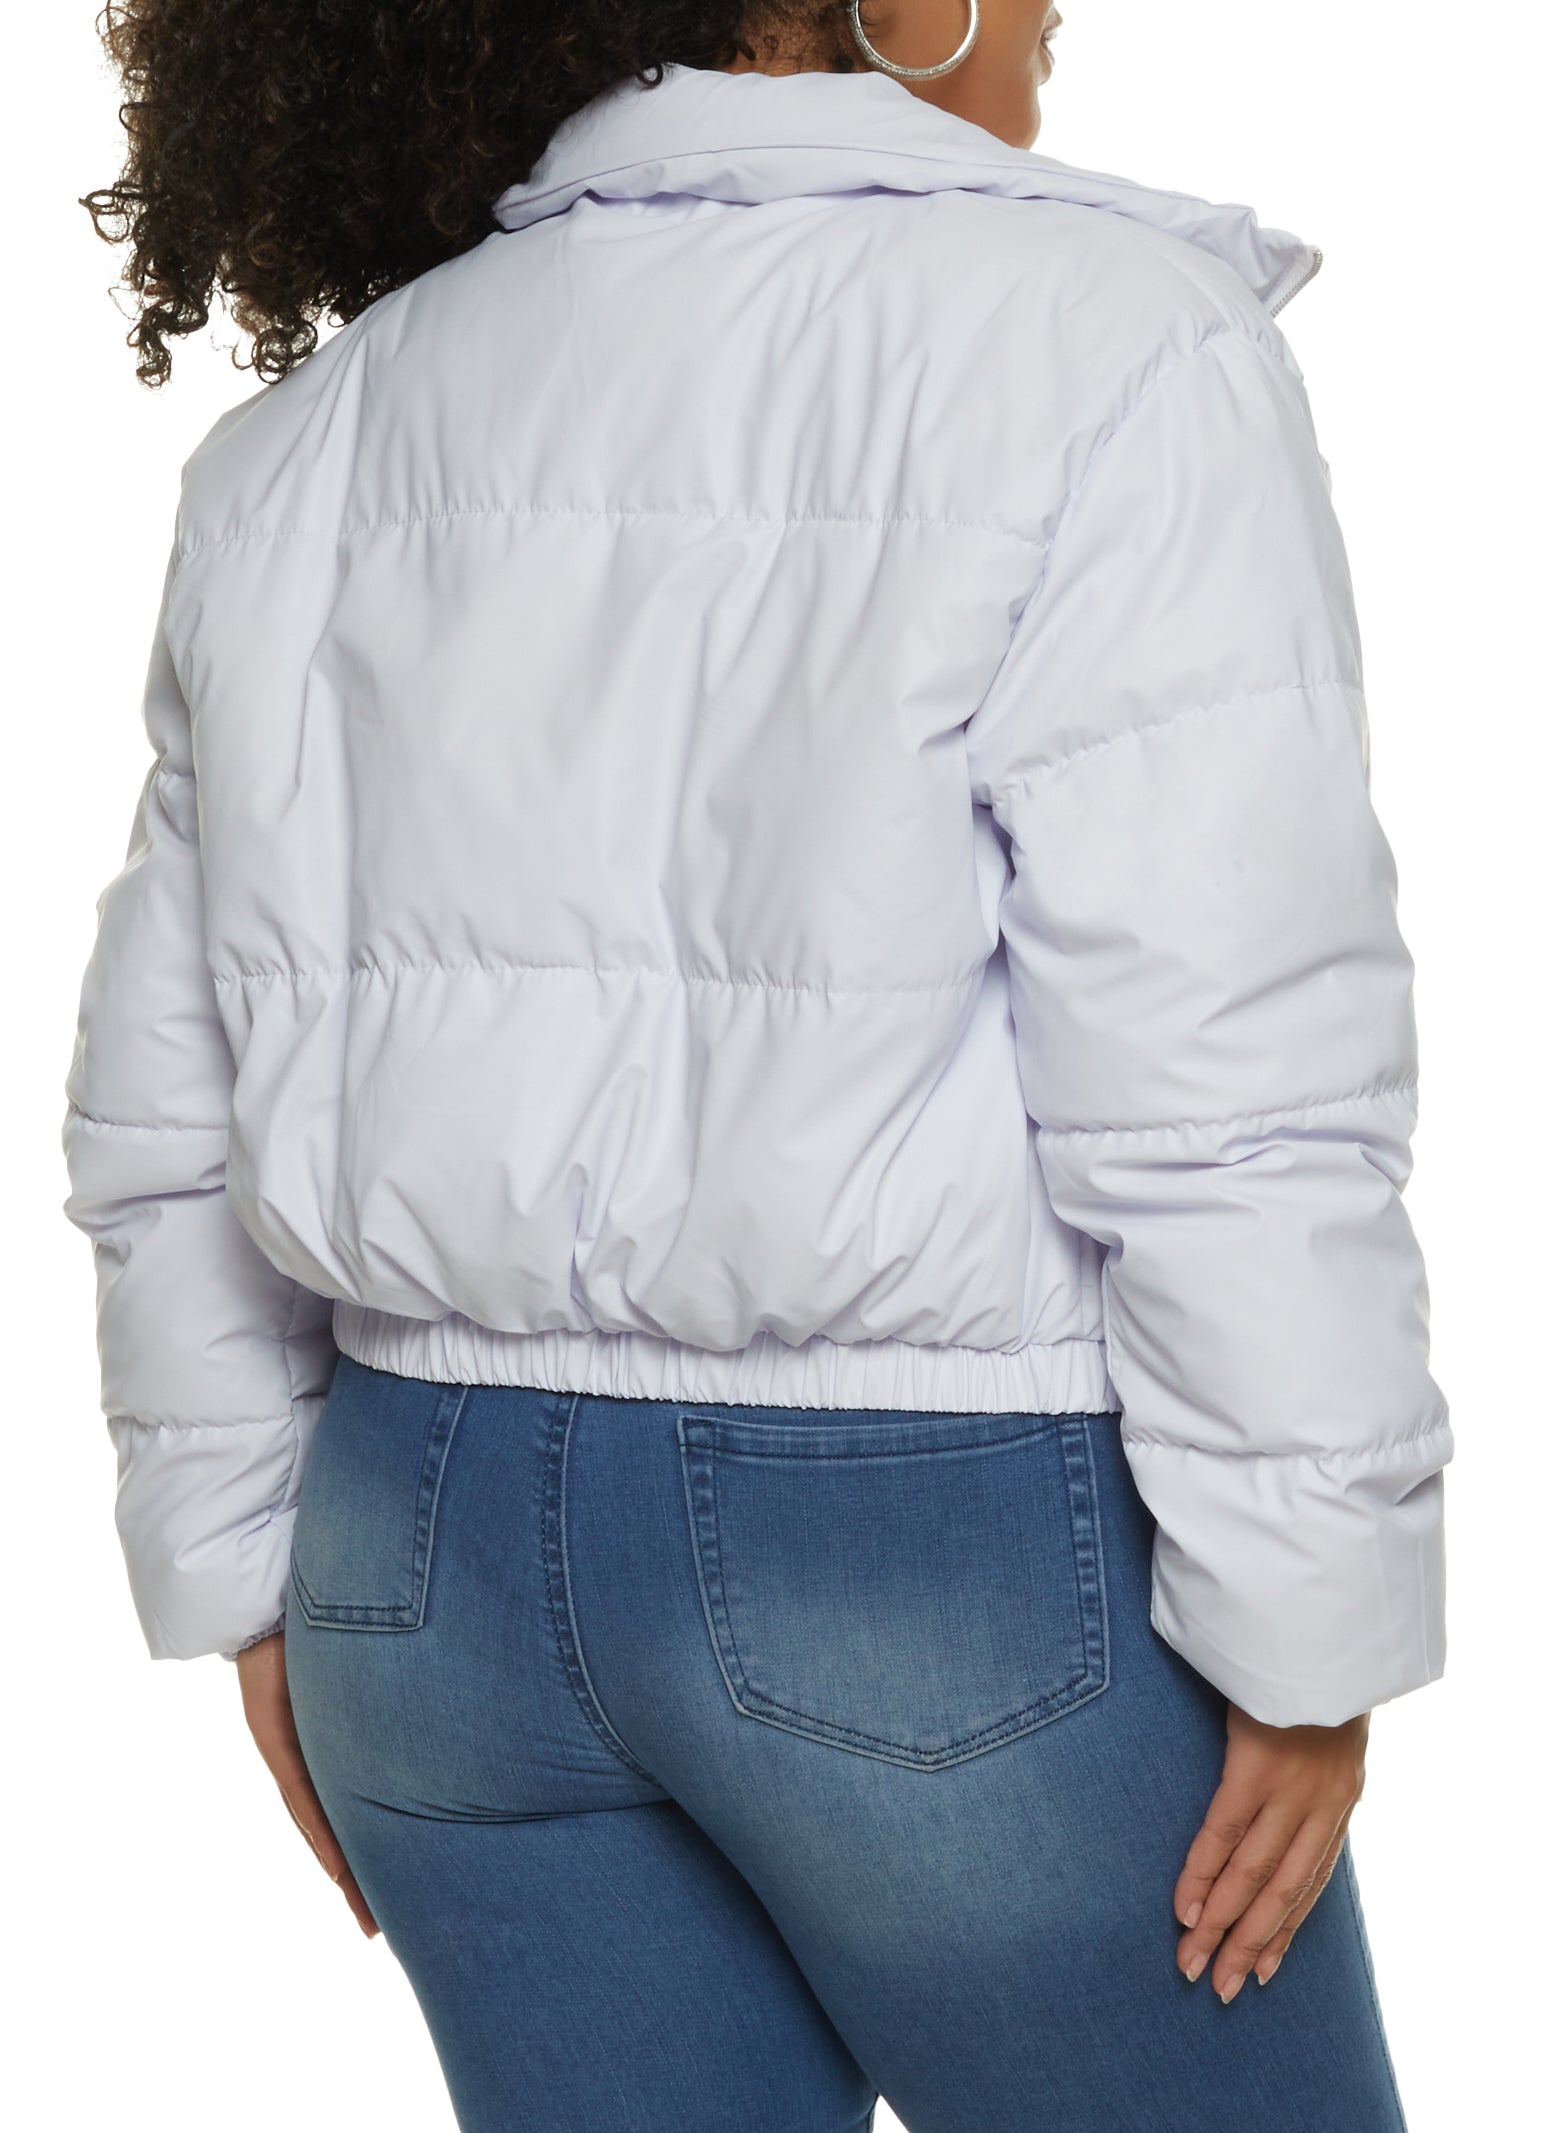 Womens Plus Size Faux Leather Zip Front Puffer Jacket, White, Size 1X